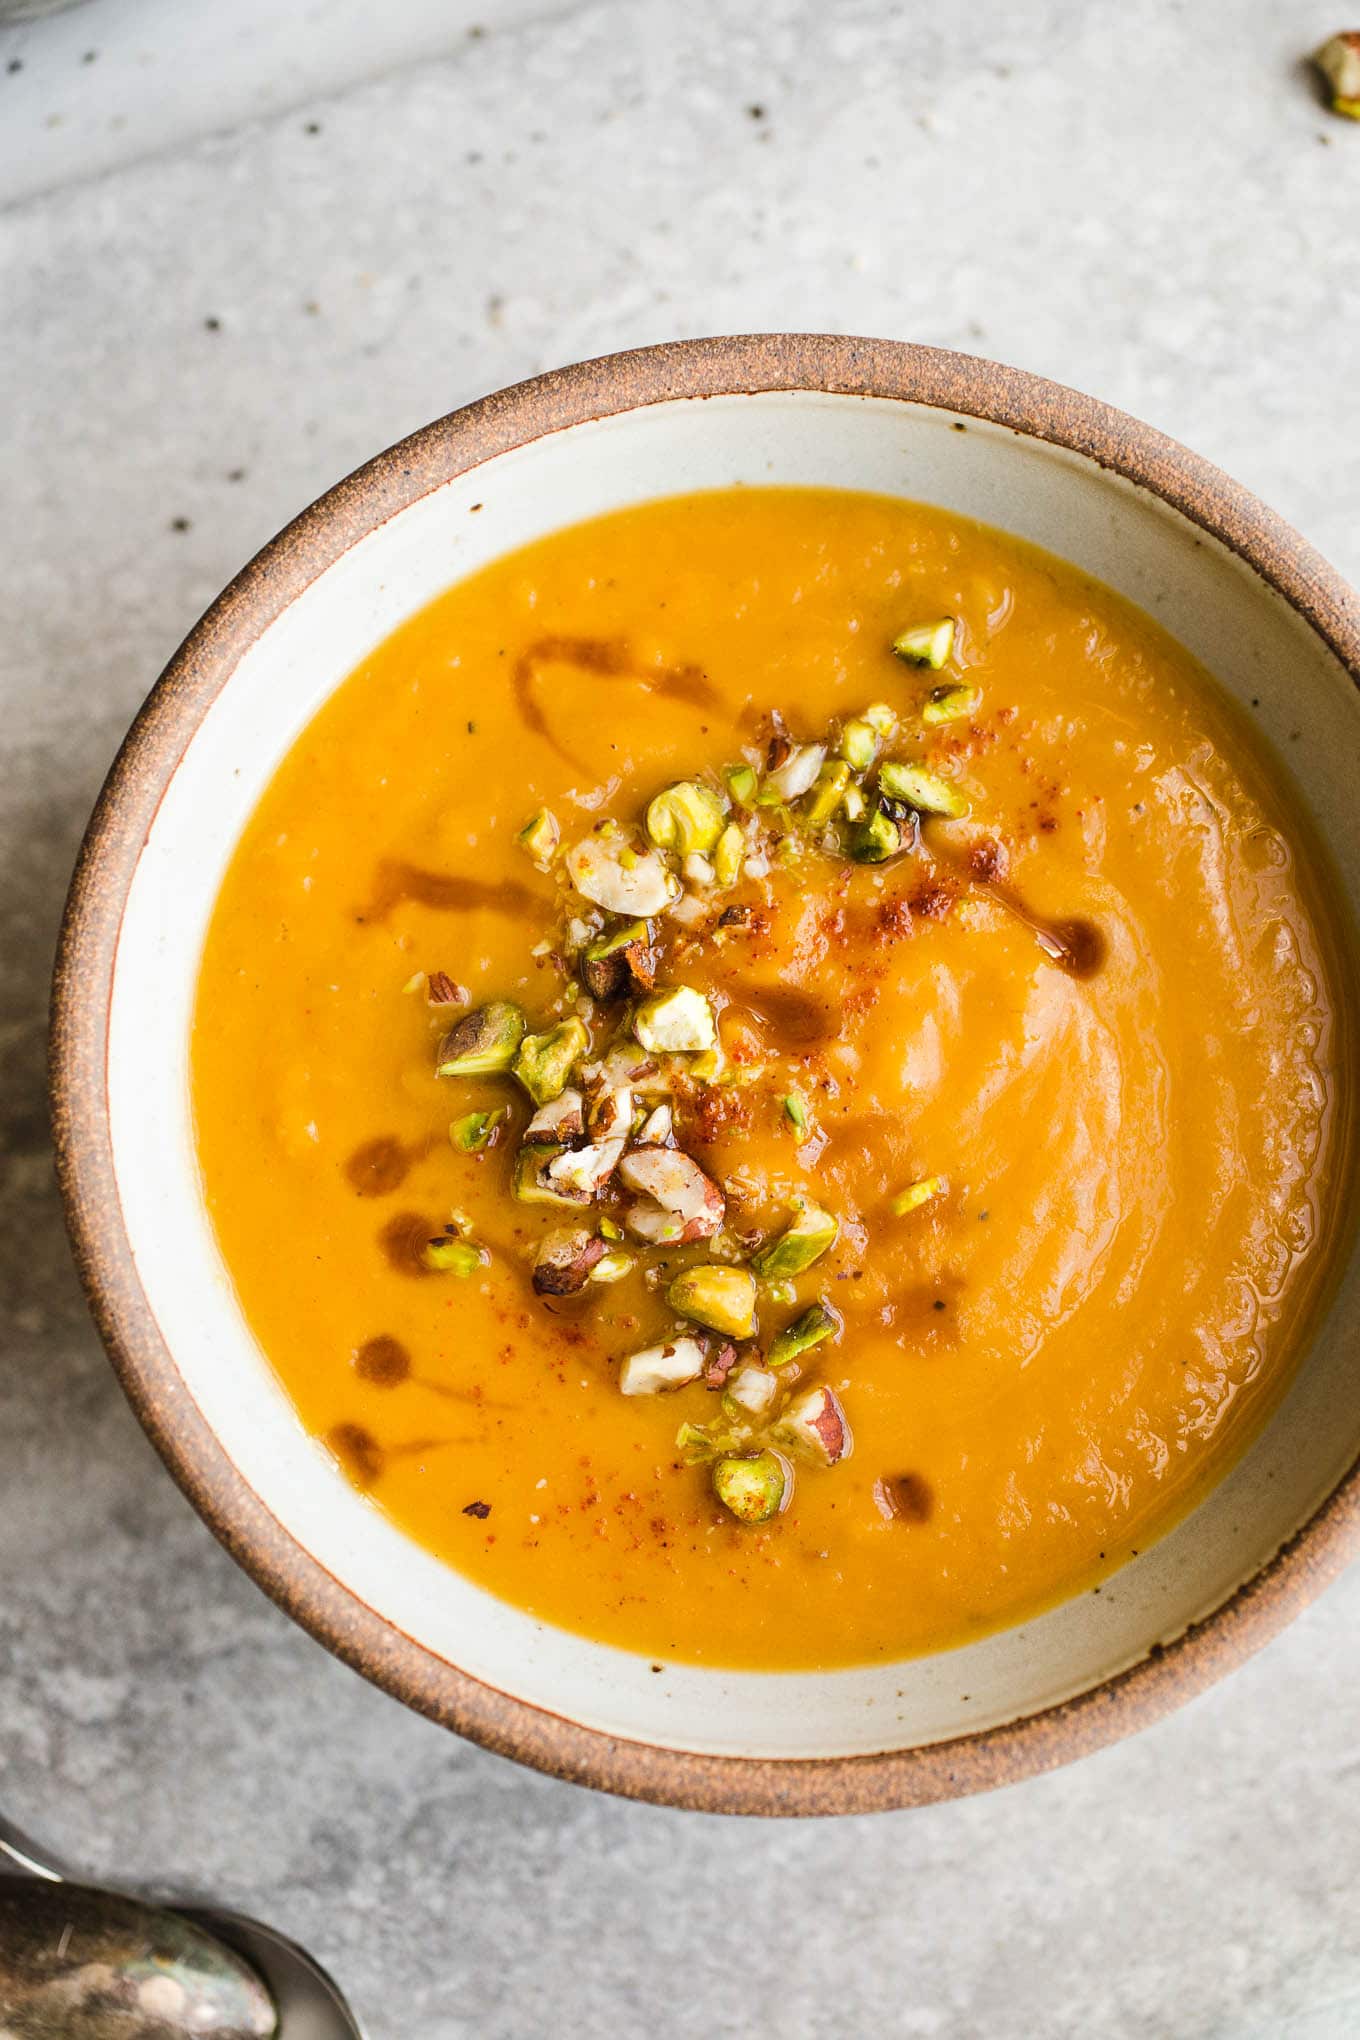 A rustic bowl filled with creamy sweet potato soup.